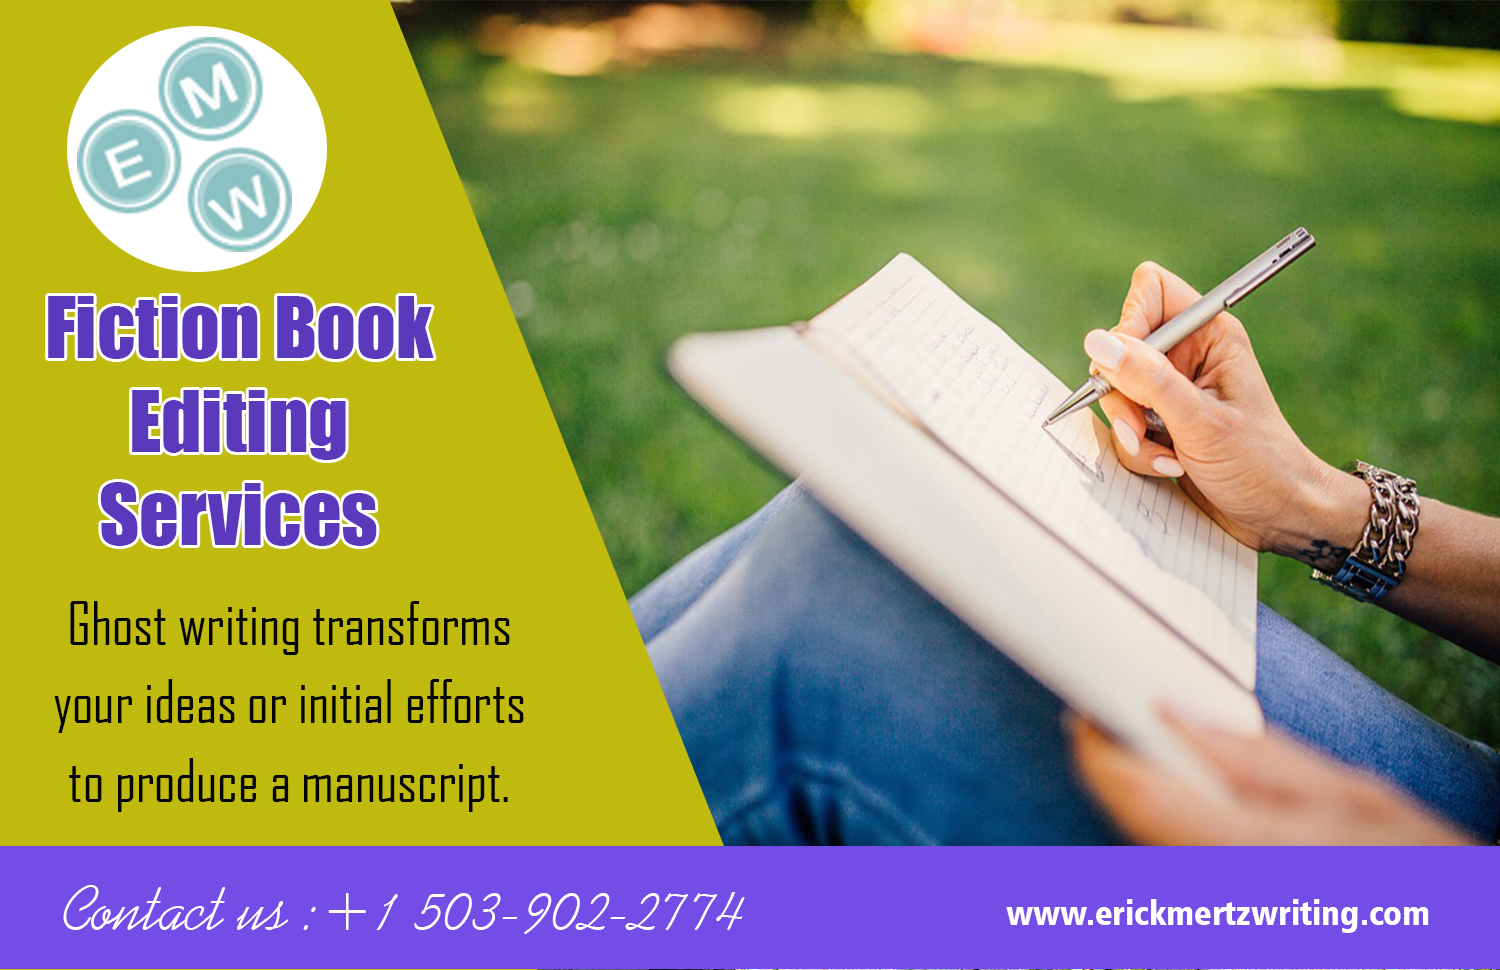 Fiction Book Editing Services